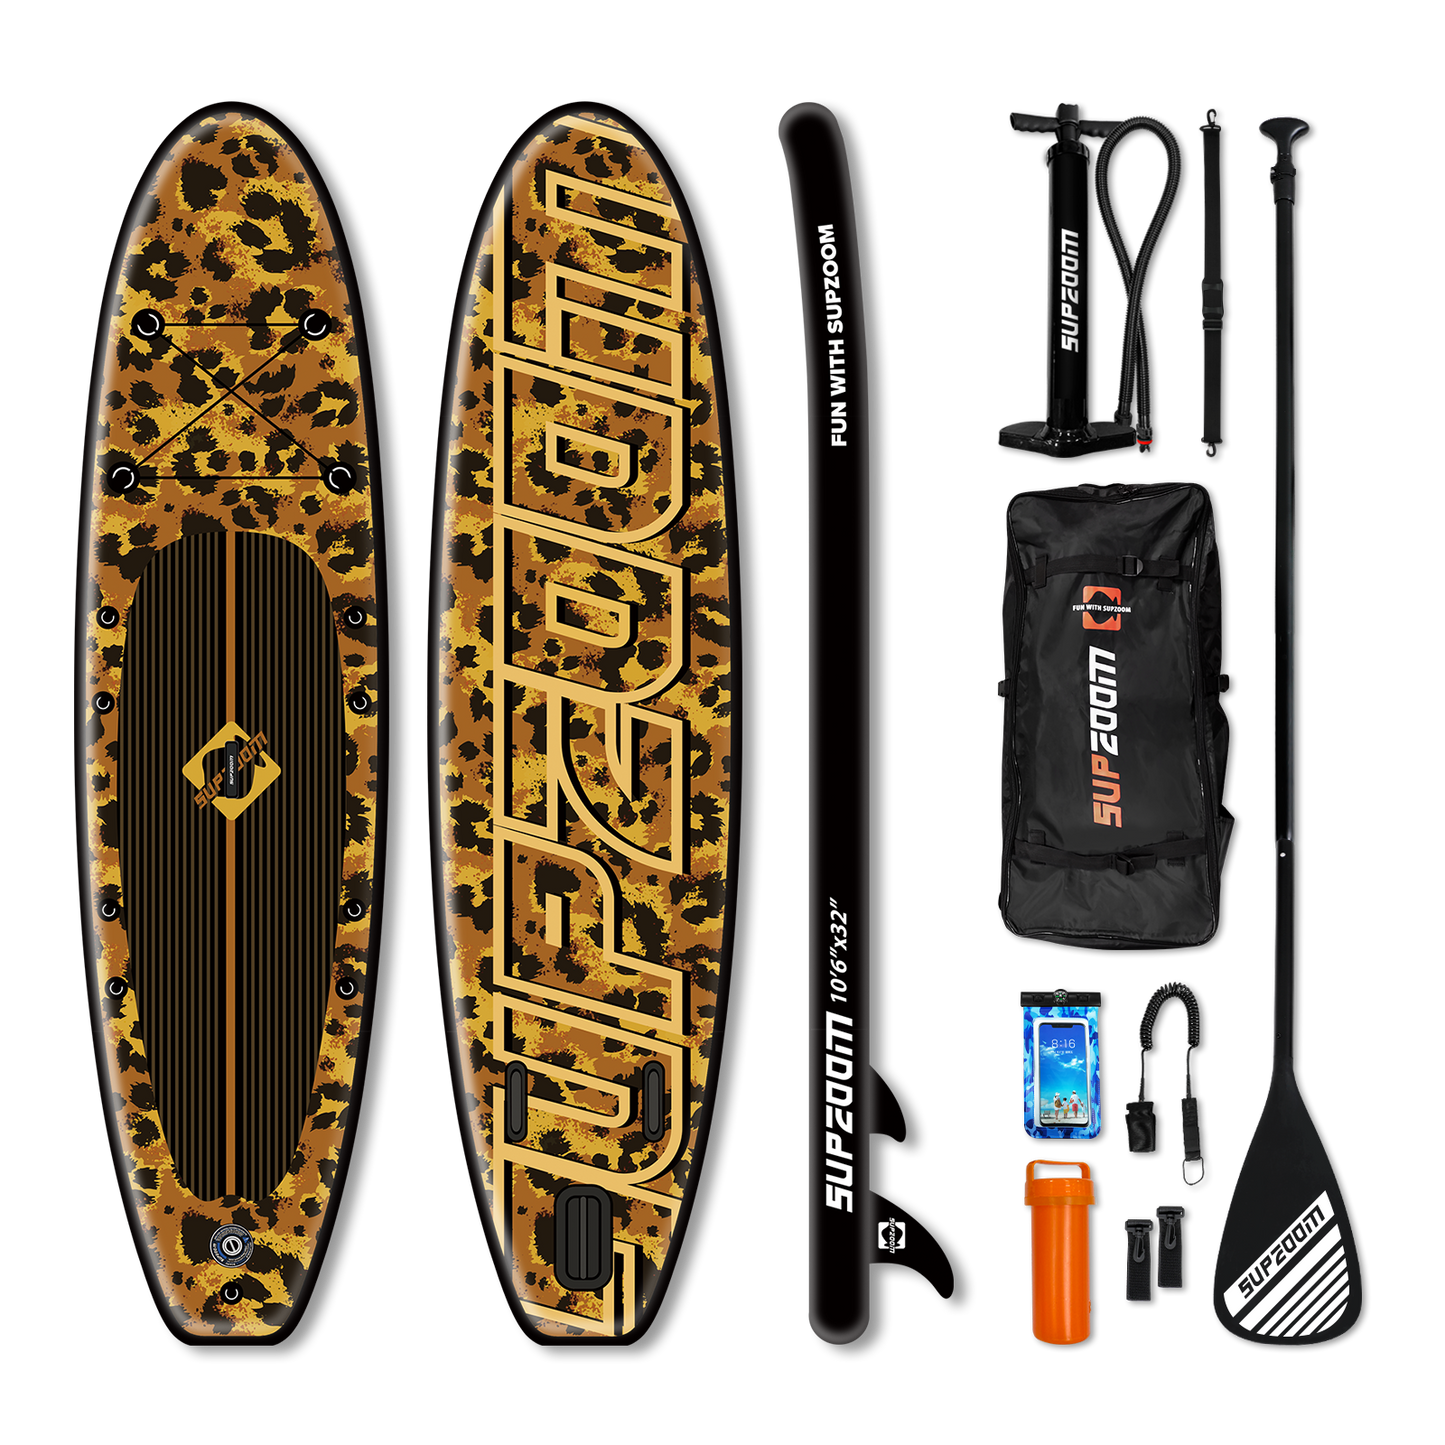 All round 10'6" inflatable stand up paddle board | Supzoom yellow leopard style